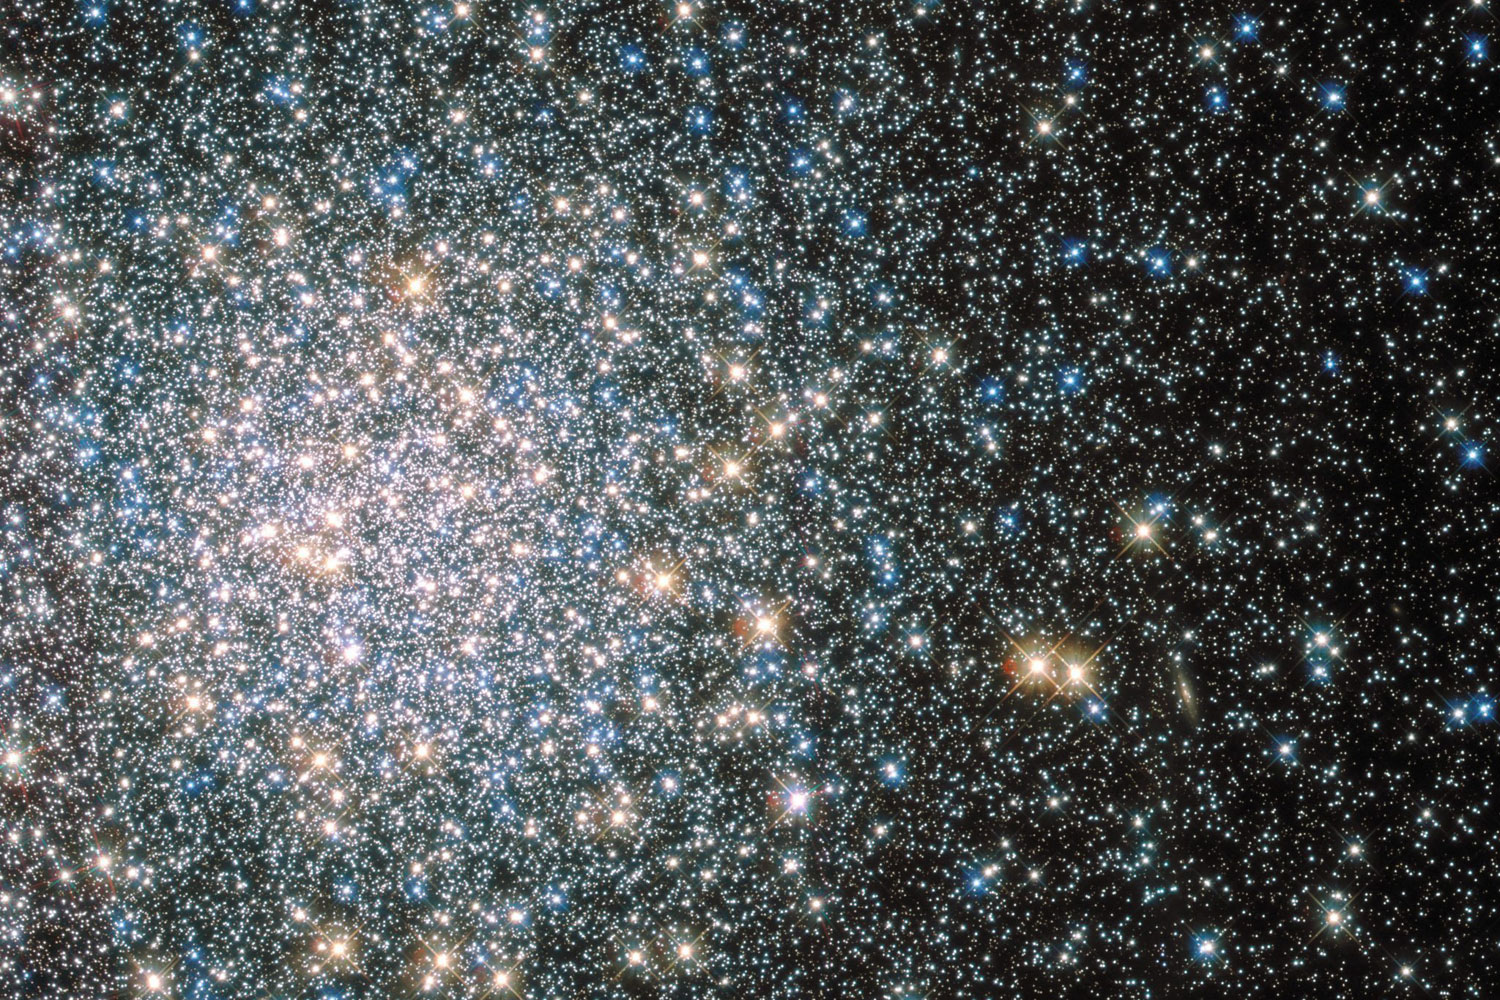 This image released on April 26, 2014 shows Messier 5 (M5), a globular cluster which consists of hundreds of thousands of stars bound together by their collective gravity. M5 is one of the oldest globulars, its stars estimated to be nearly 13 billion years old.